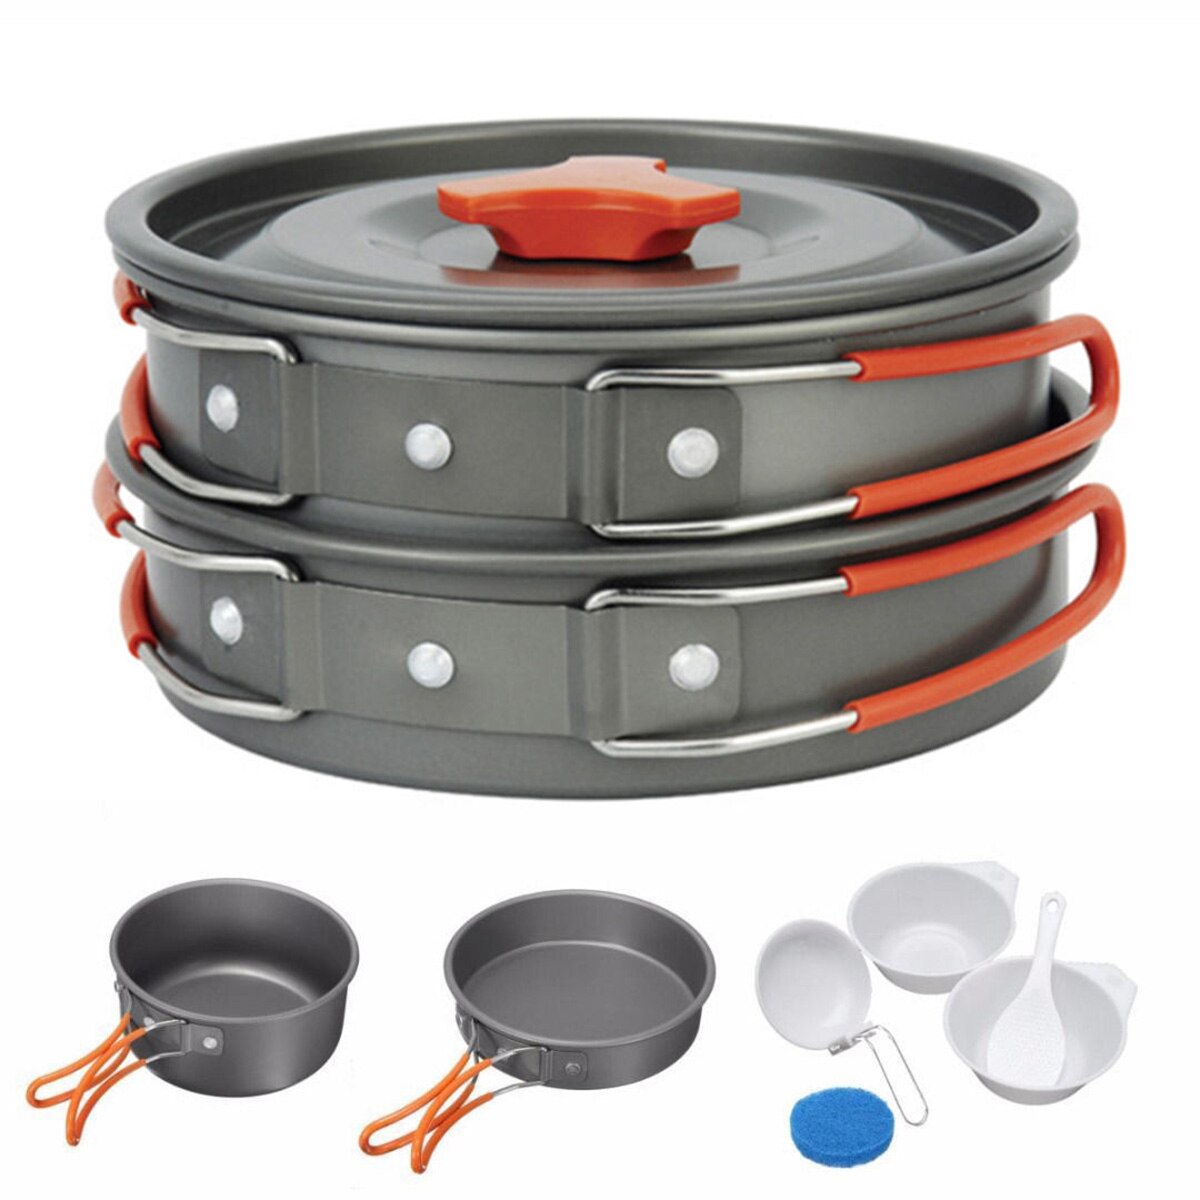 8Pcs/ Set Portable Outdoor Cooking Non-stick Pots Pans Portable Outdoor Camping Hiking Cooking Set Cookware travel tableware